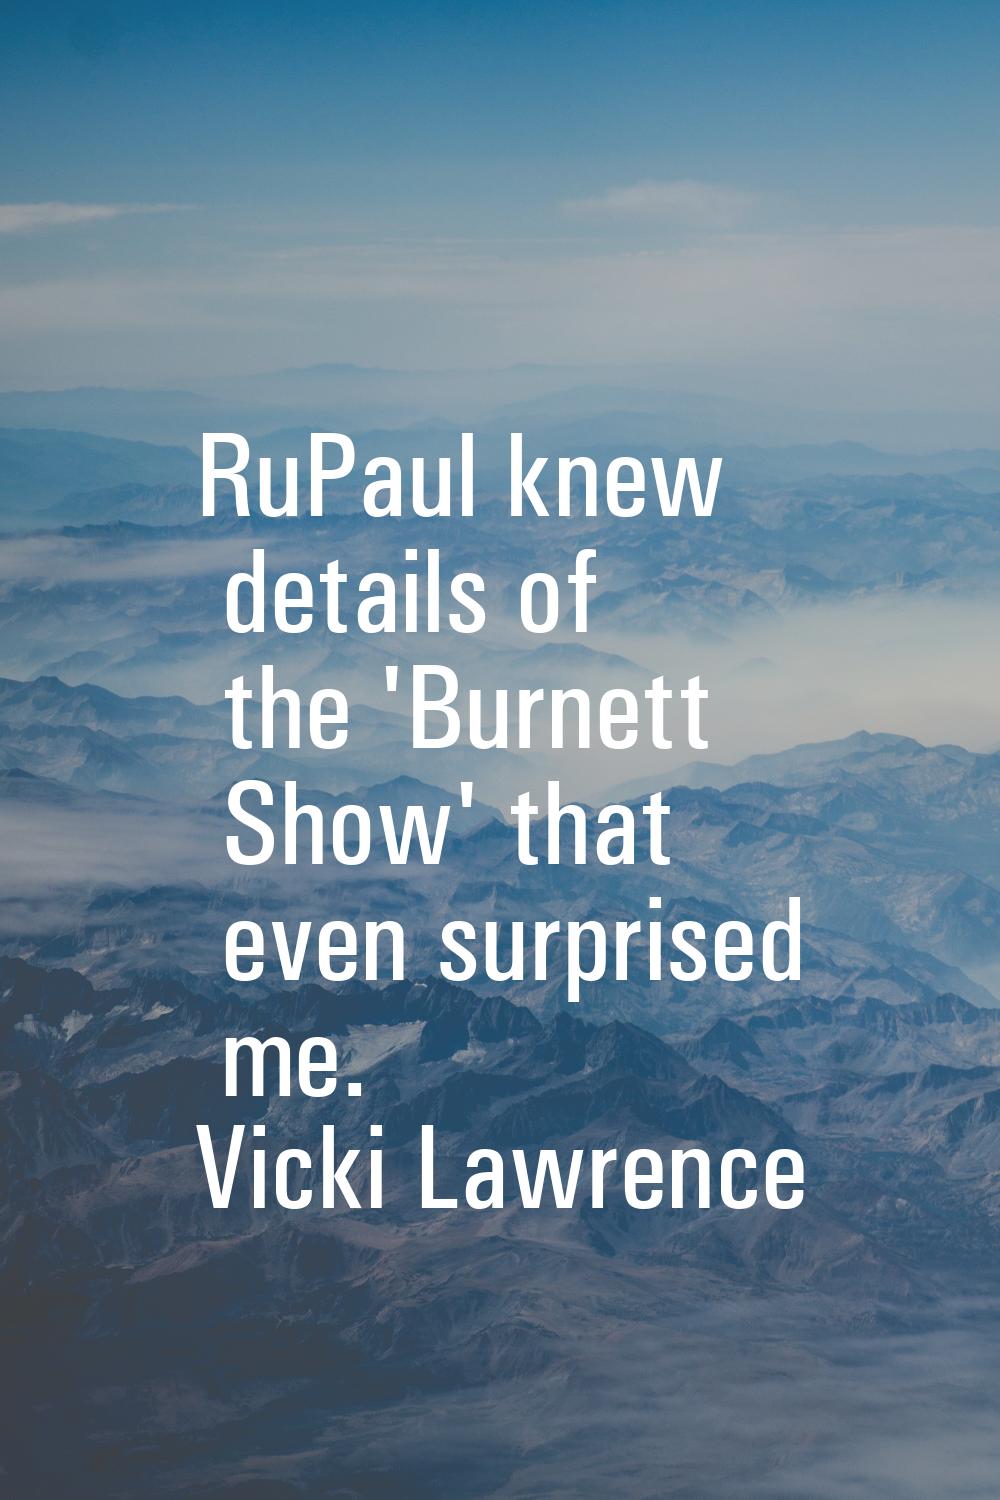 RuPaul knew details of the 'Burnett Show' that even surprised me.